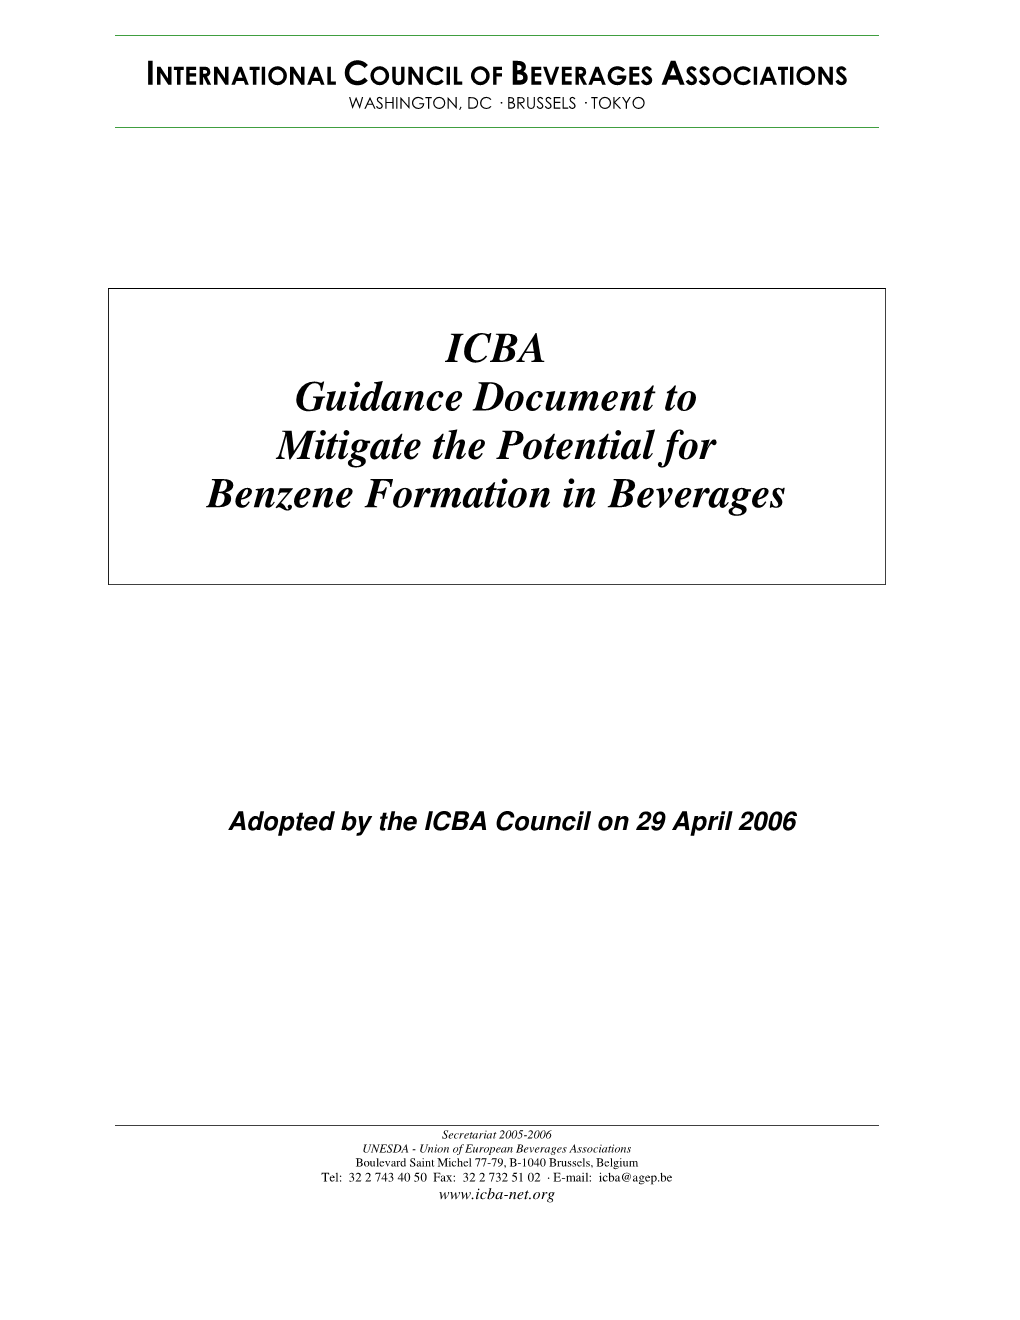 ICBA Guidance Document to Mitigate the Potential for Benzene Formation in Beverages